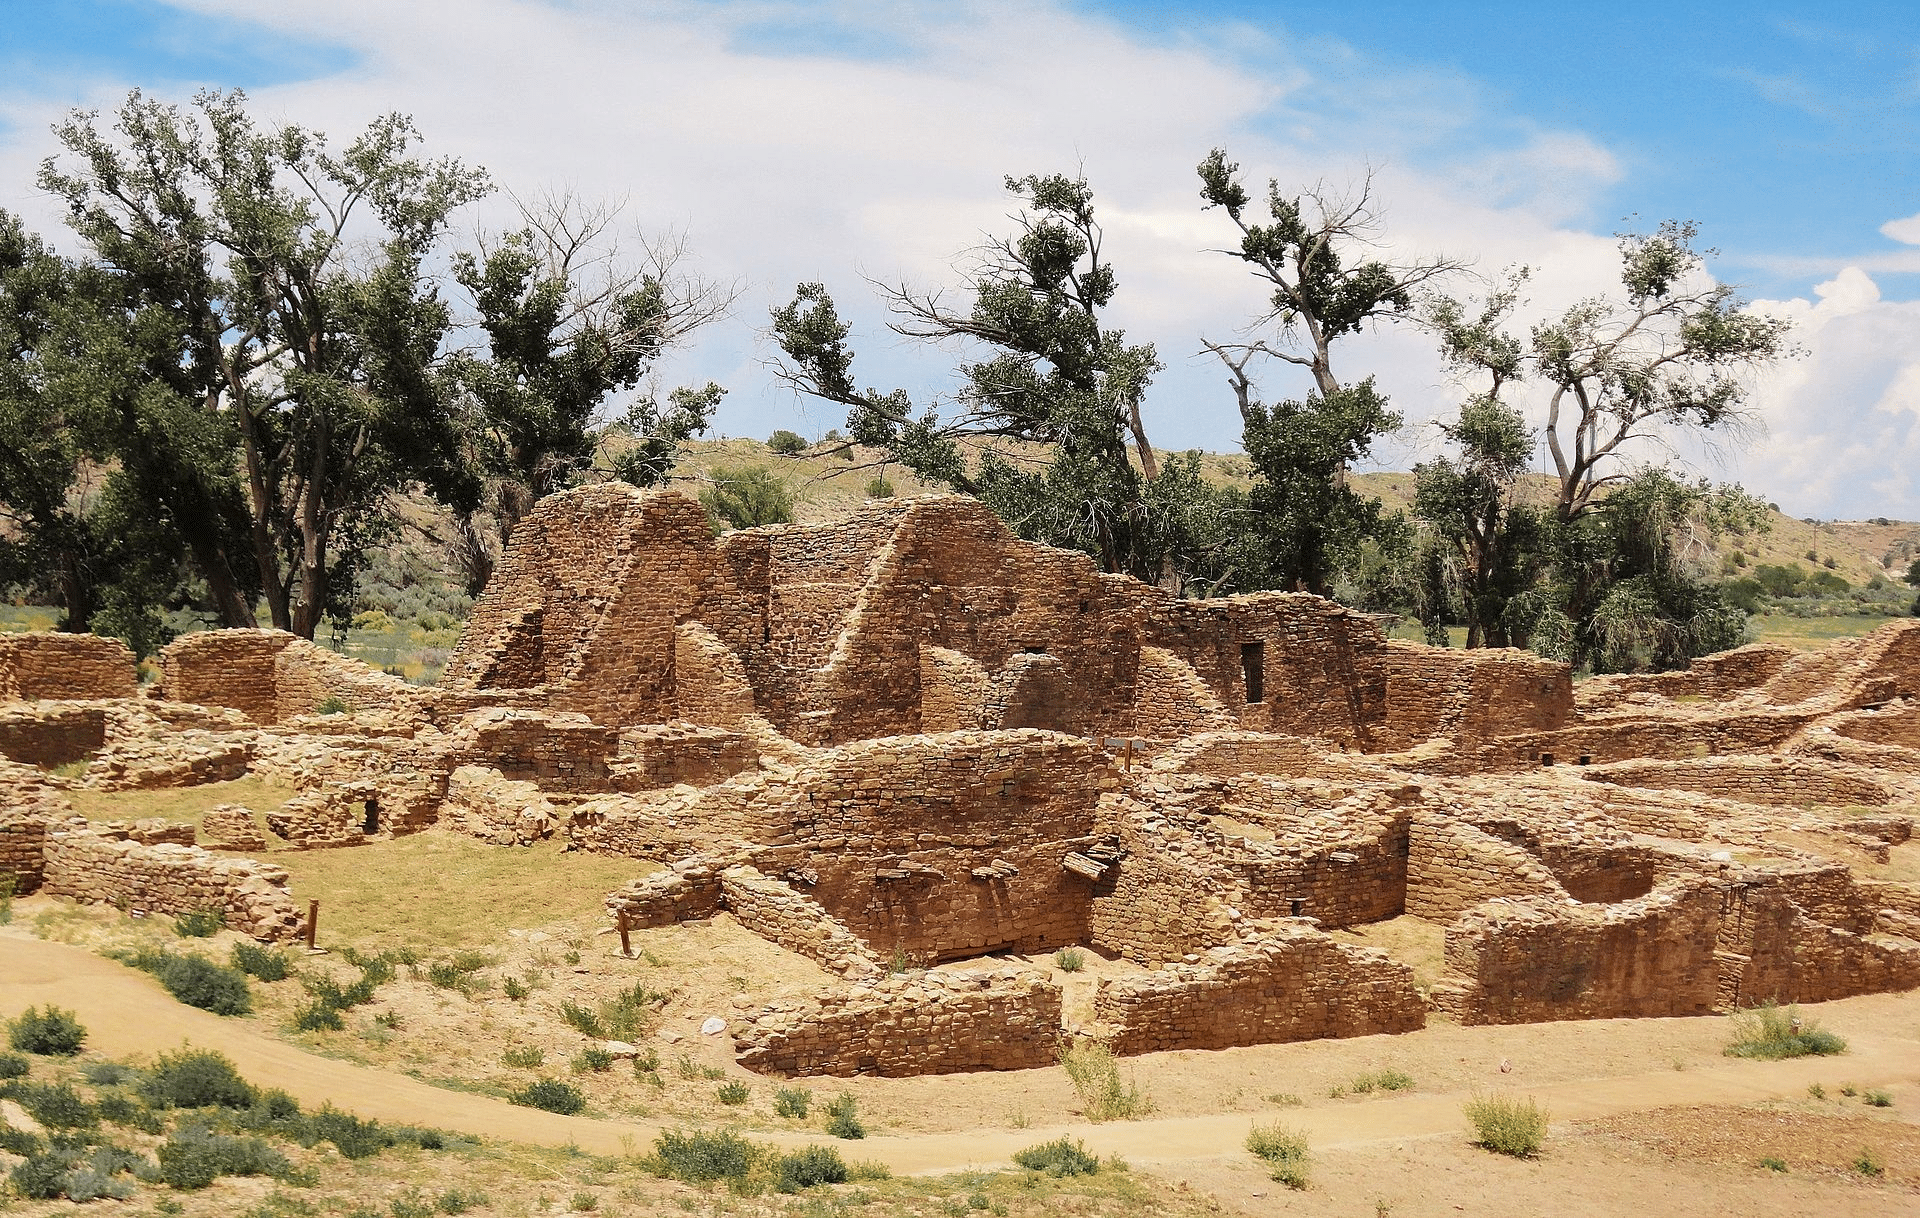 The Aztec Ruins National Monument